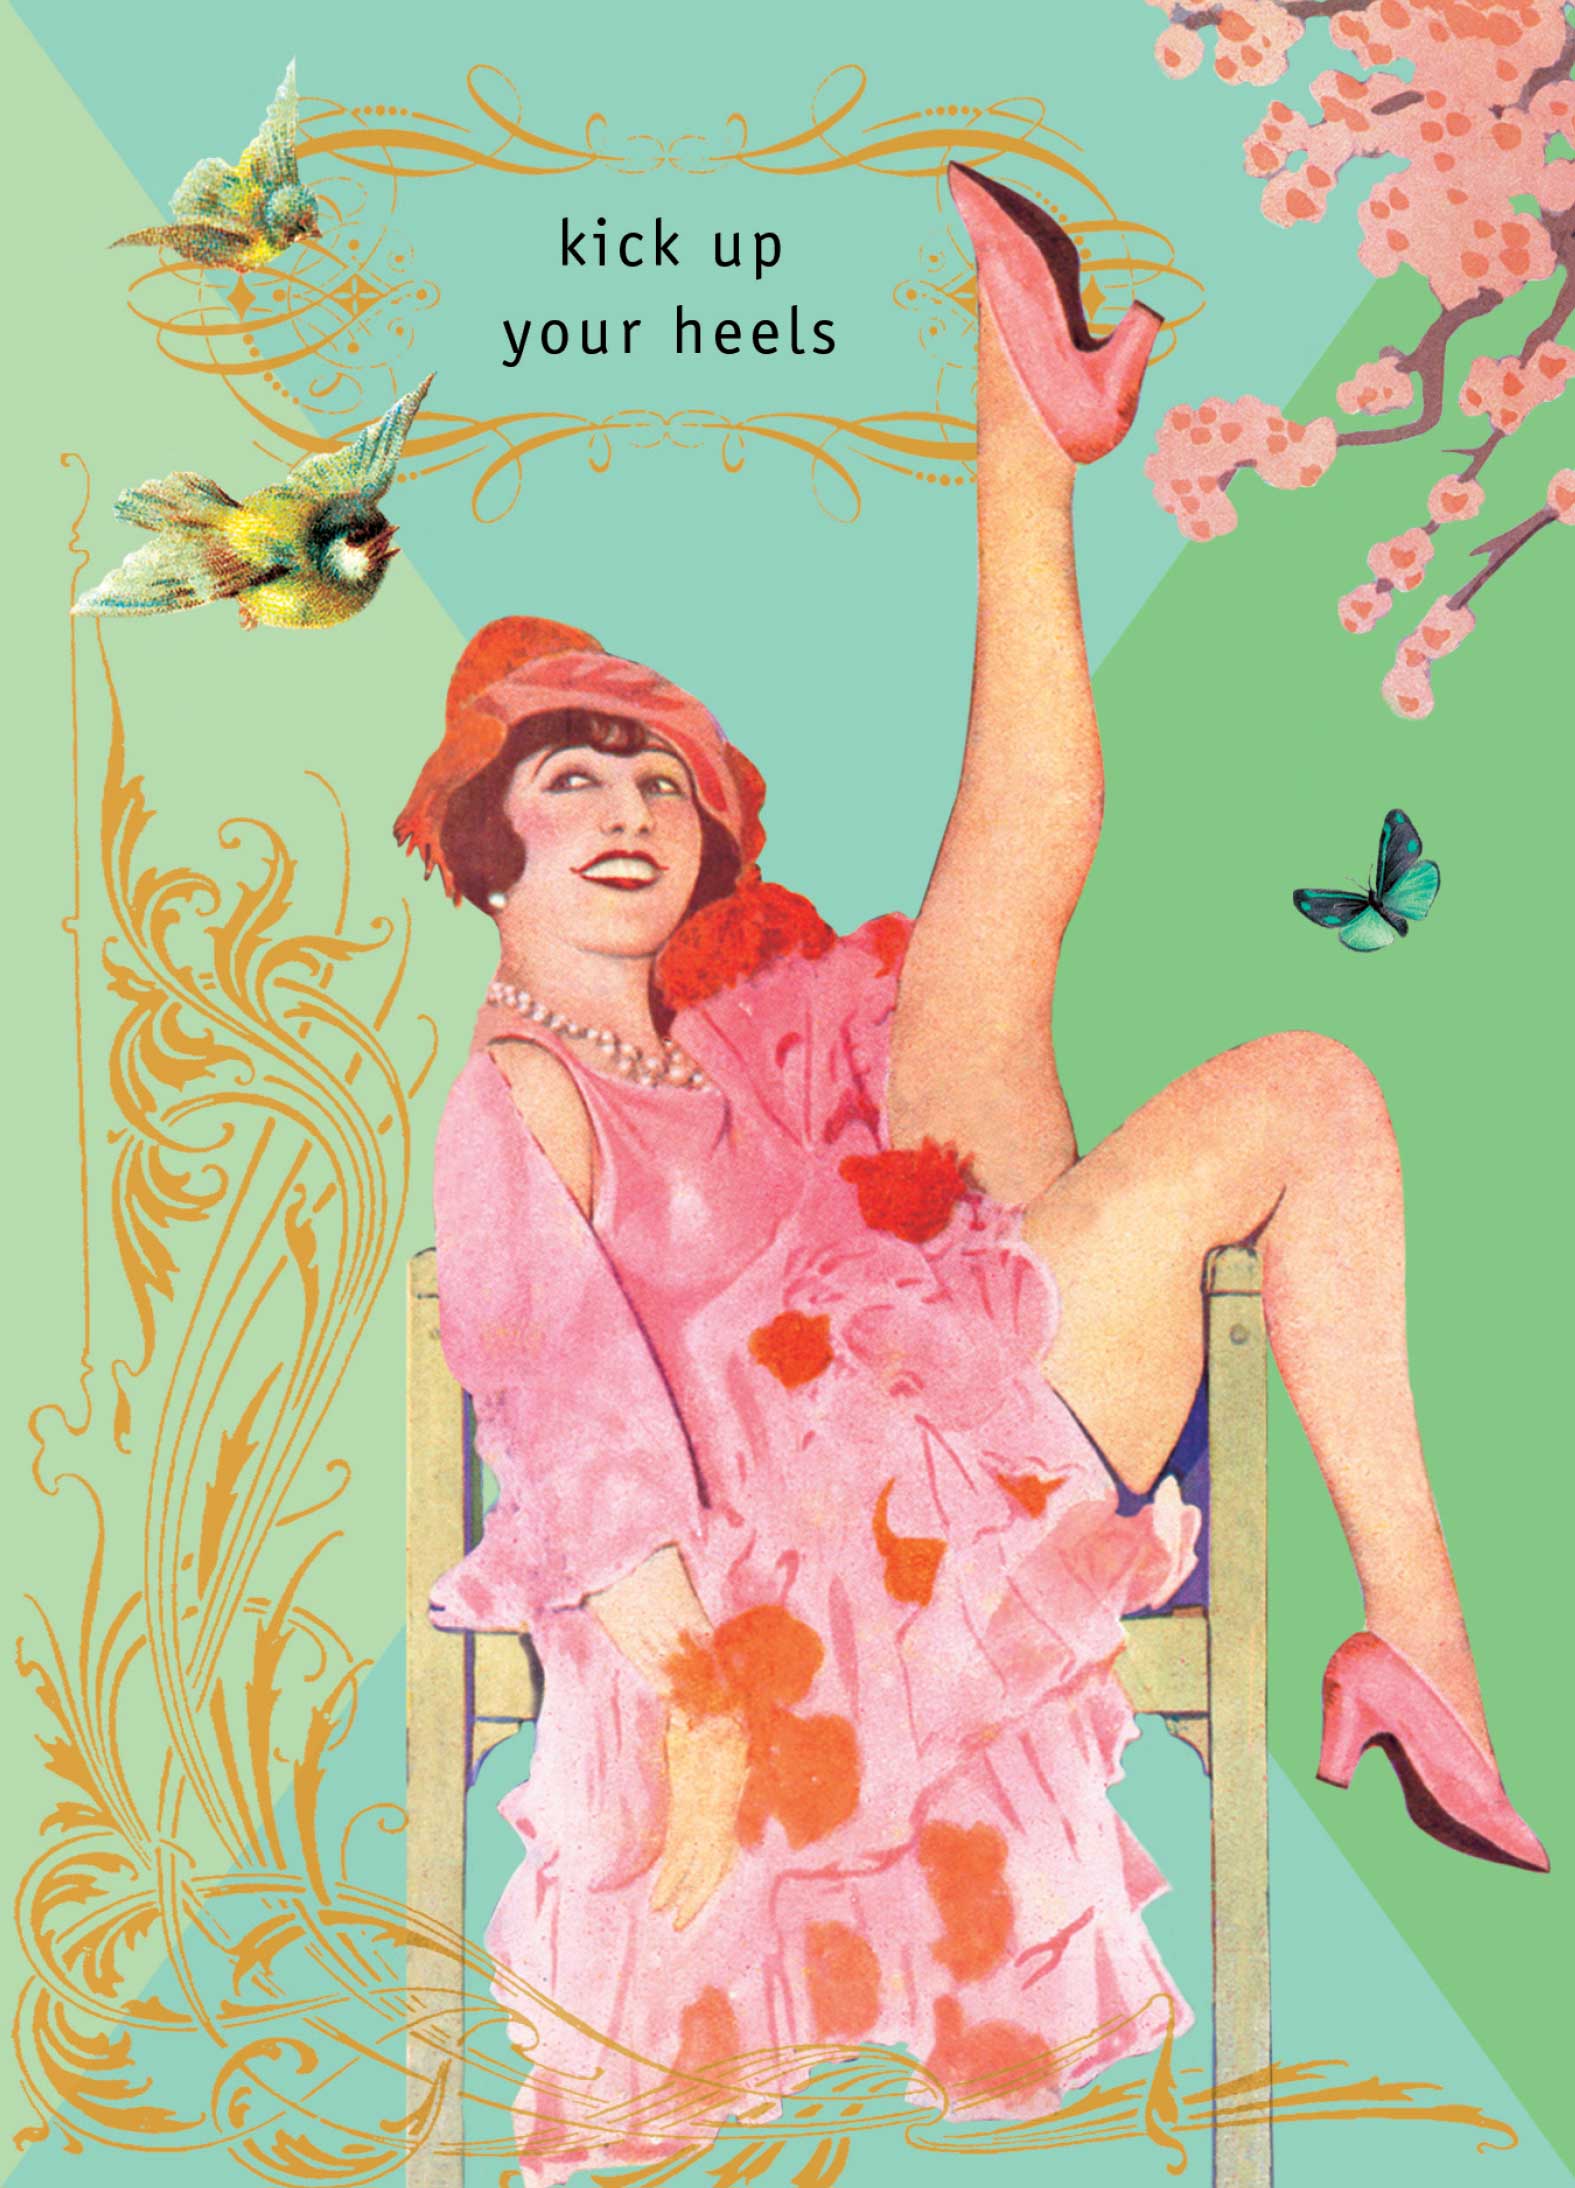 Kick up your heels #06 - Fashion Poster